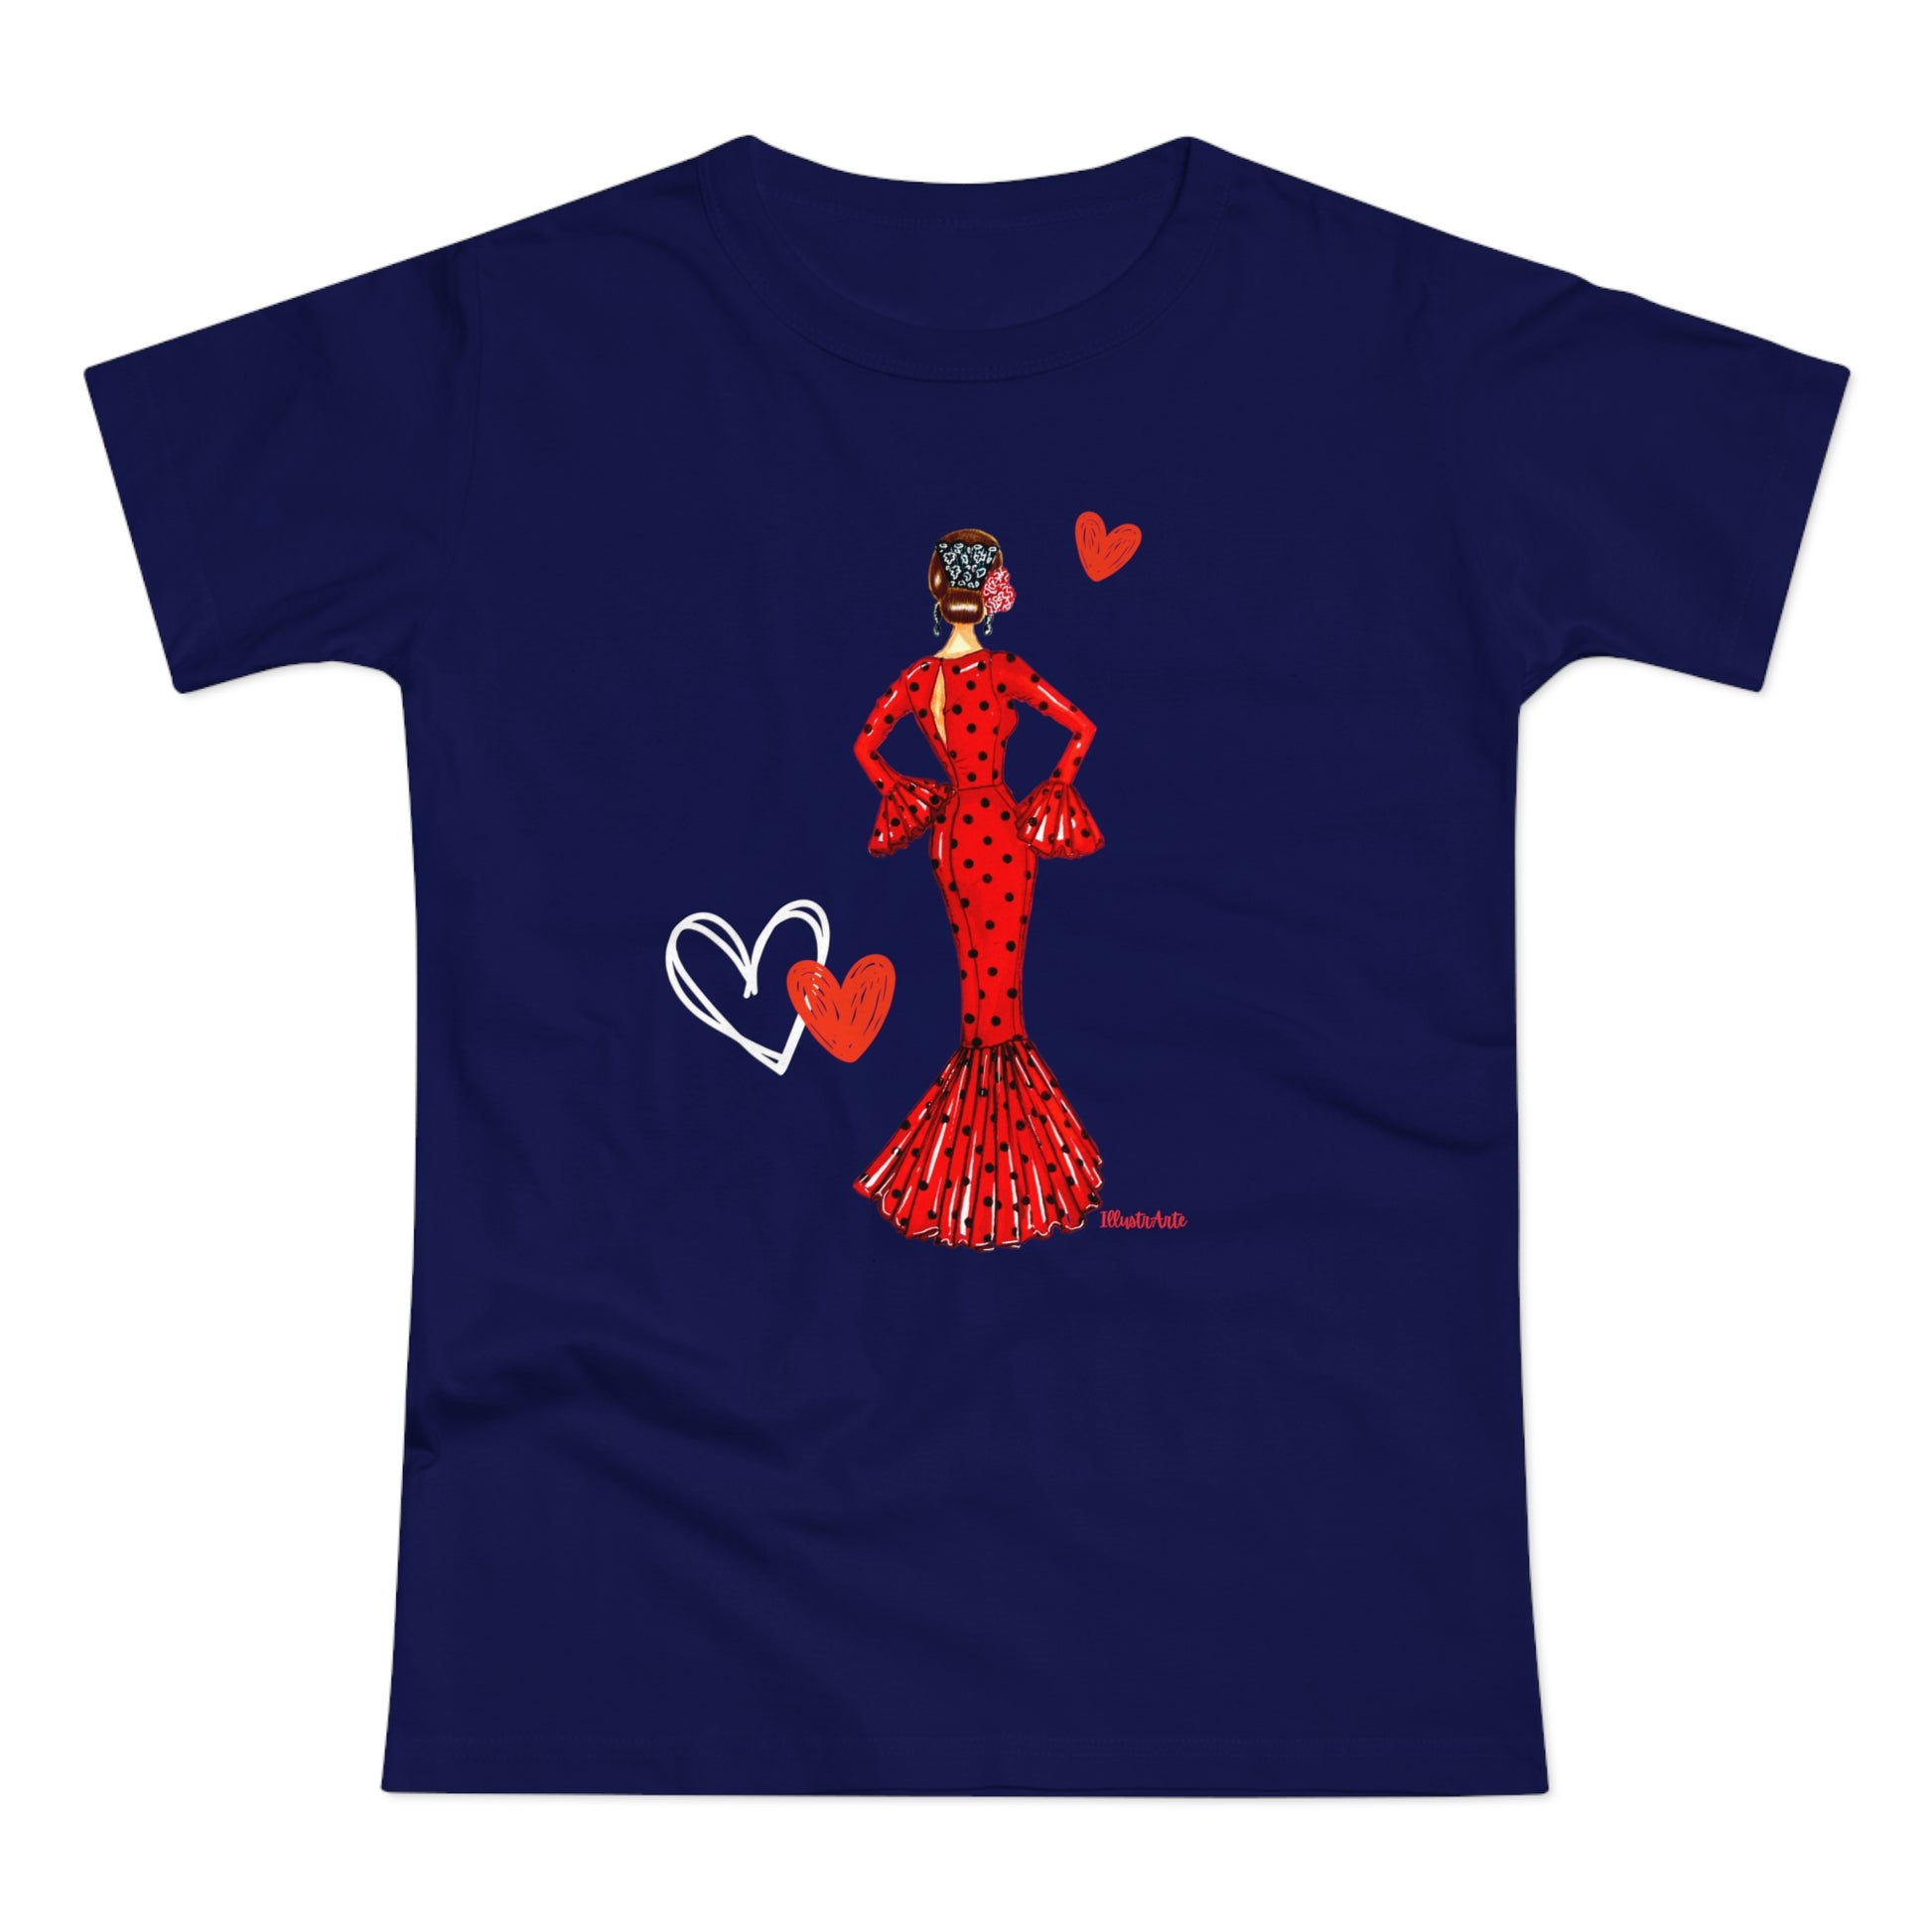 a t - shirt with a woman in a red dress